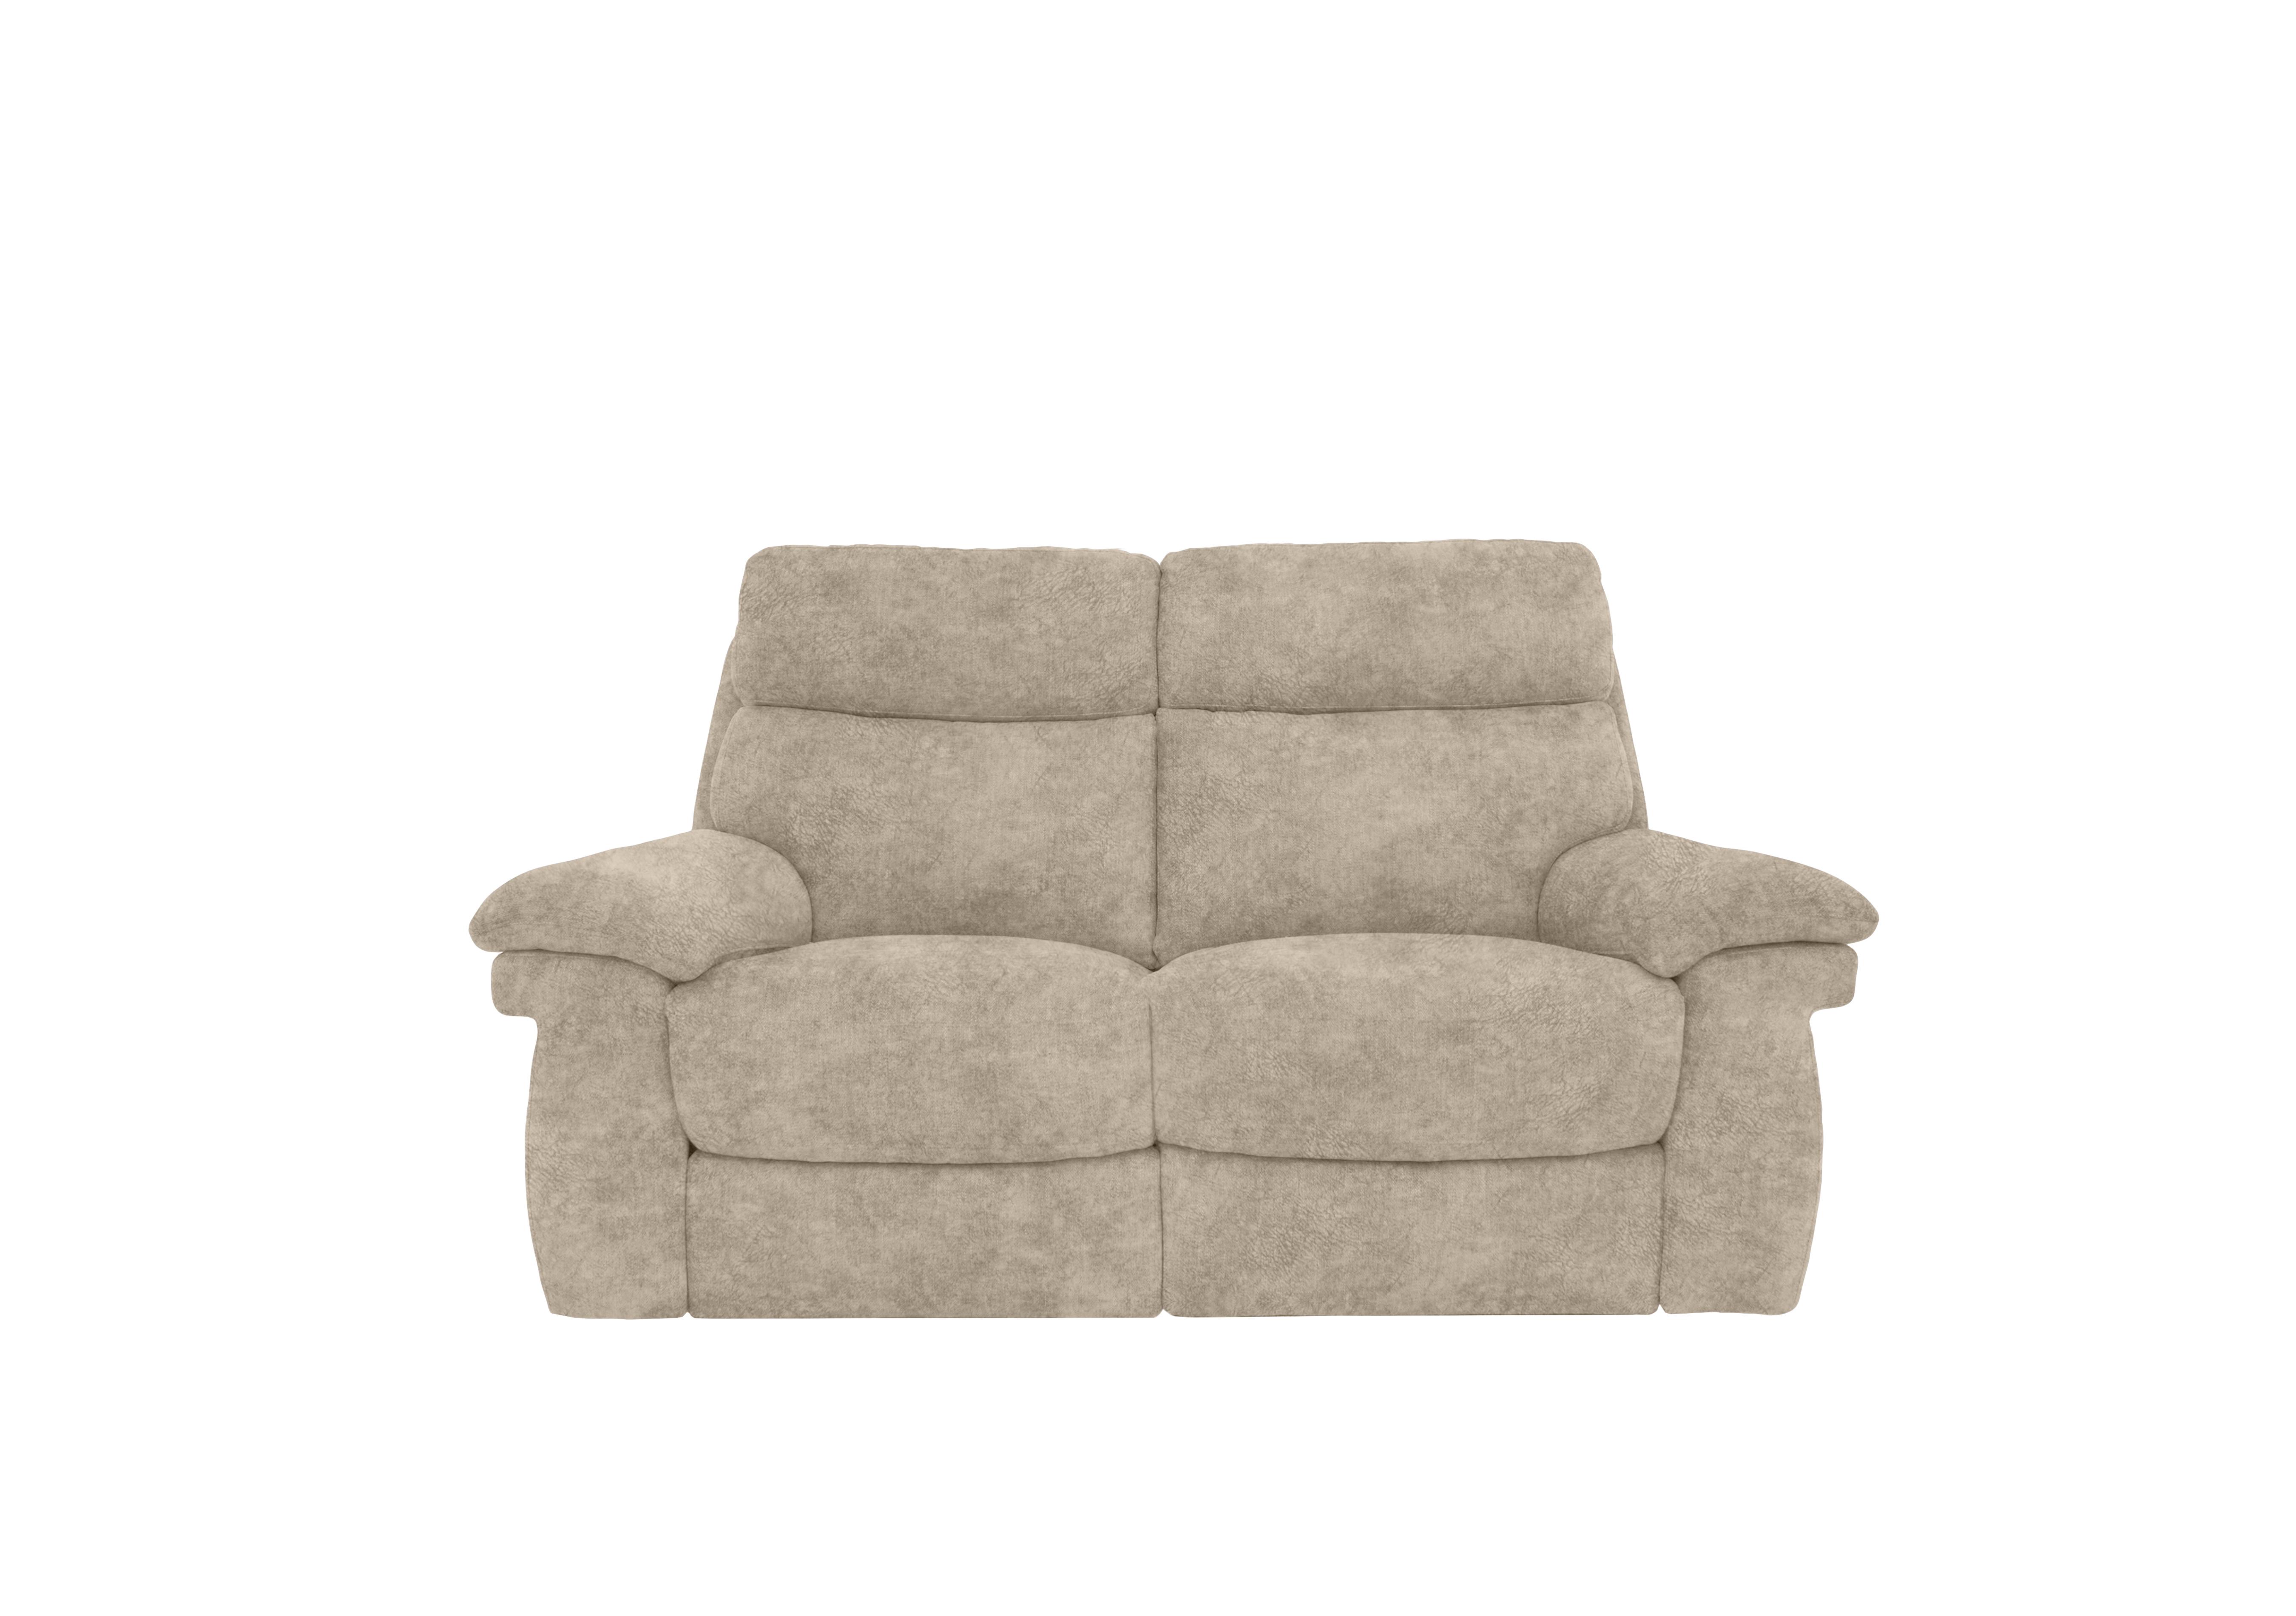 Serene 2 Seater Fabric Power Recliner Sofa with Power Headrests and Power Lumbar in Bfa-Bnn-R26 Cream on Furniture Village